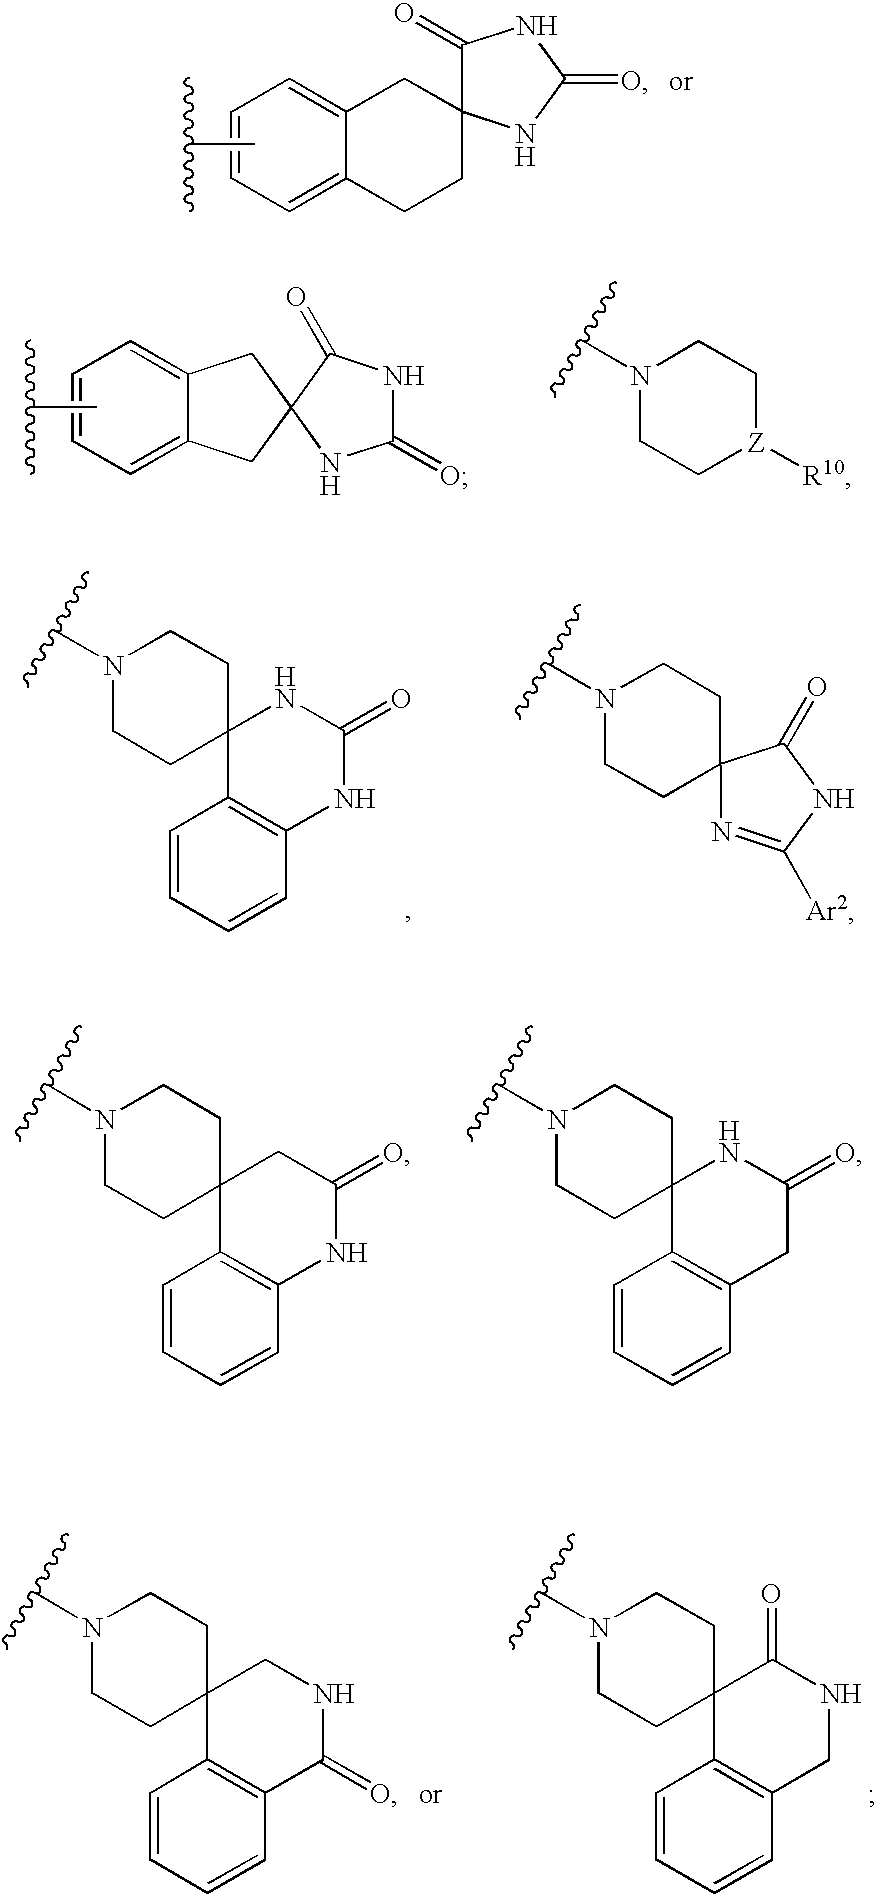 Constrained compounds as CGRP-receptor antagonists